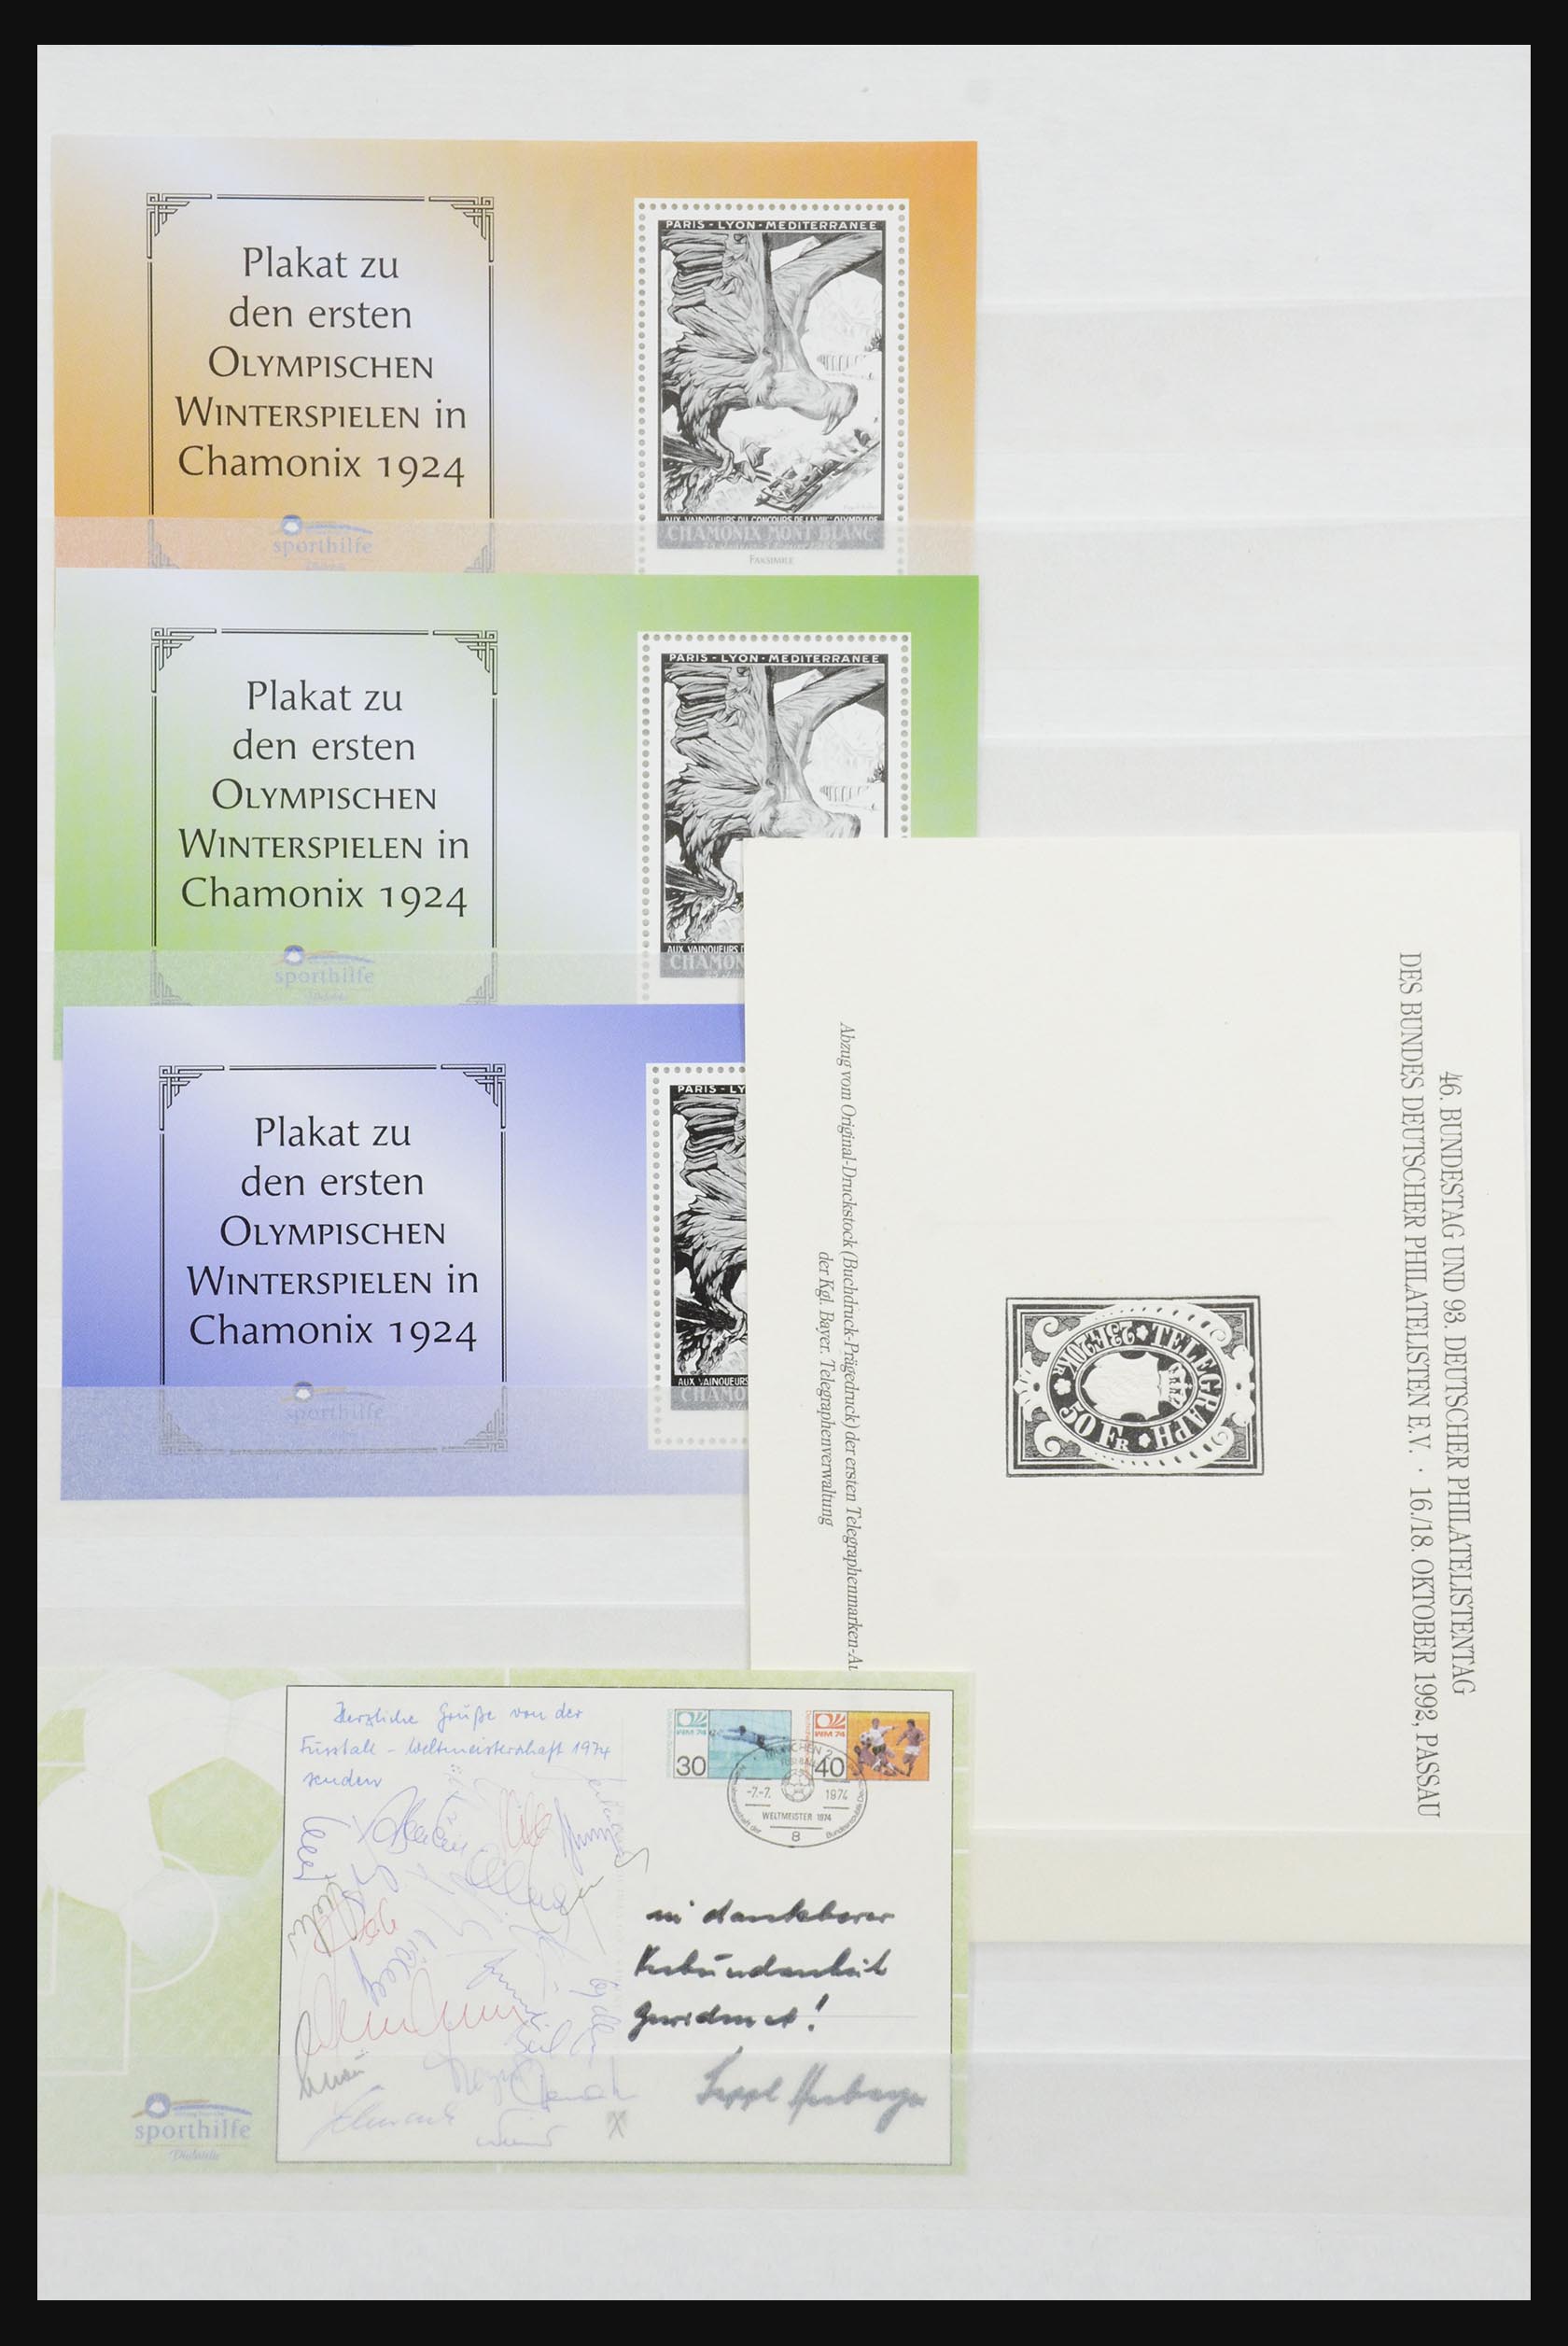 32050 023 - 32050 Bundespost special sheets 1980-2010.